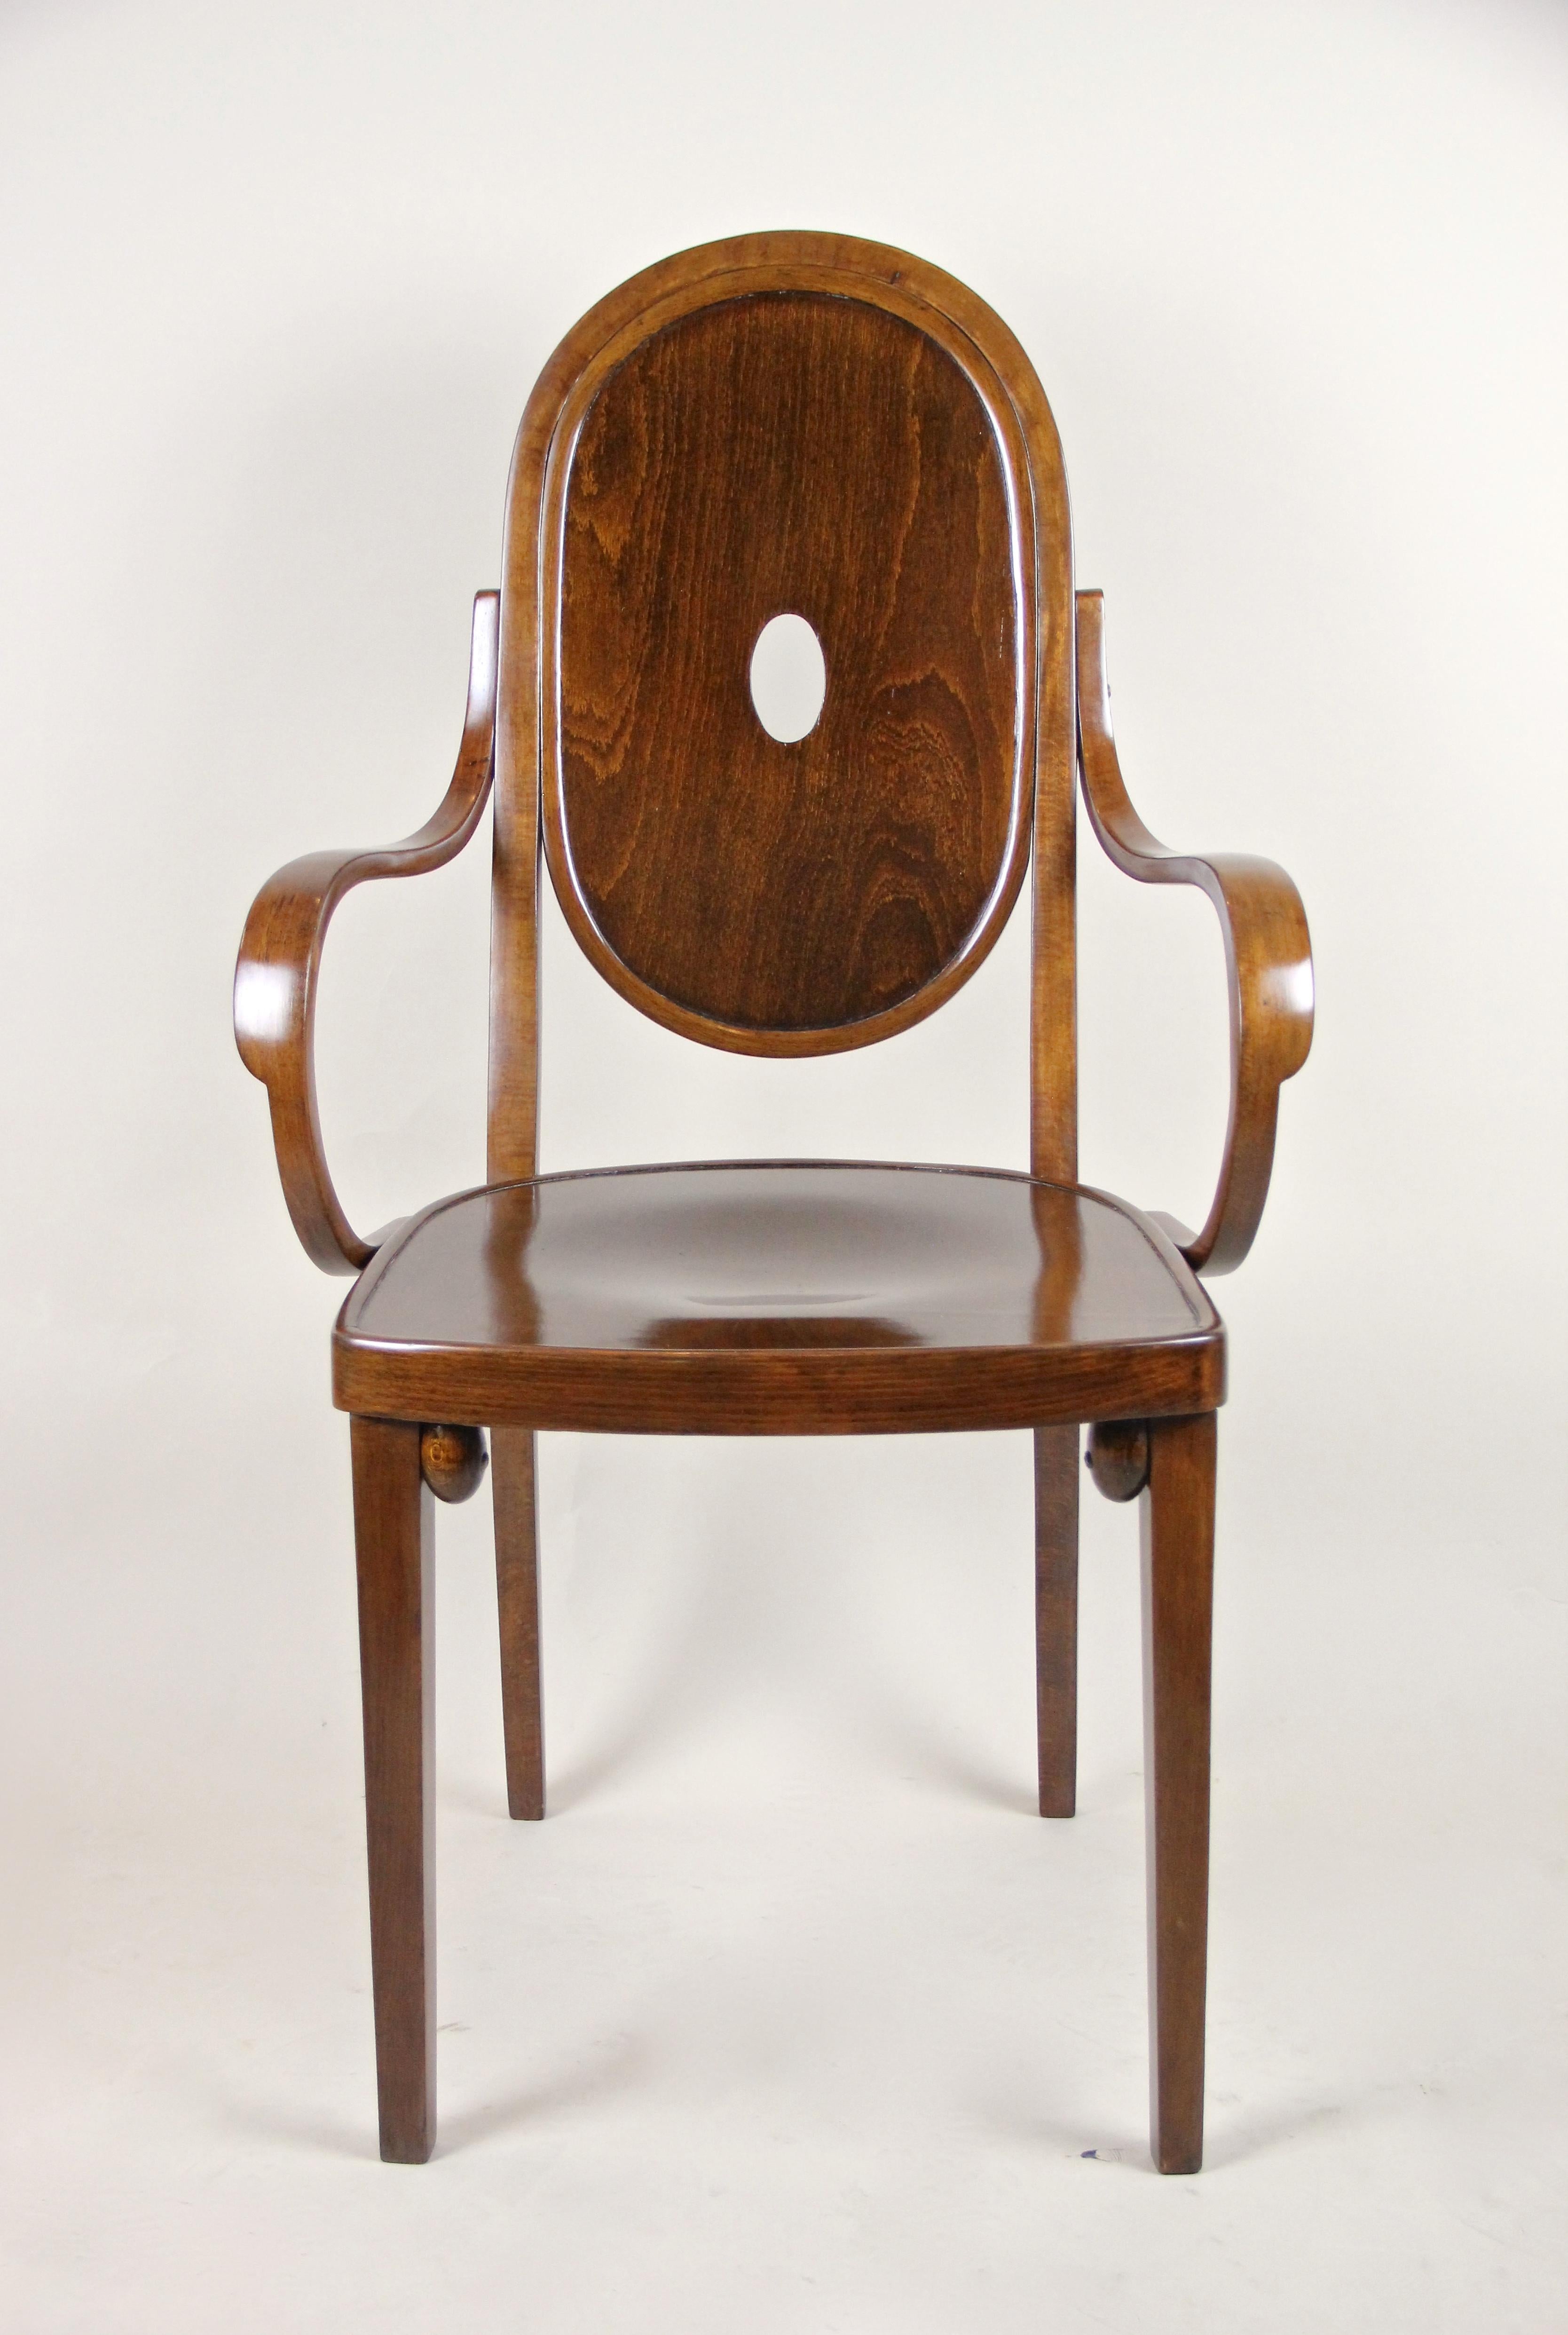 Very rare bentwood armchair from Mundus Austria, designed by the famous Austrian architect and founder of the world-renowned Wiener Werkstätte: Josef Hoffmann. Made of fine bentwood by the well-known Mundus AG circa 1915, this timeless designed